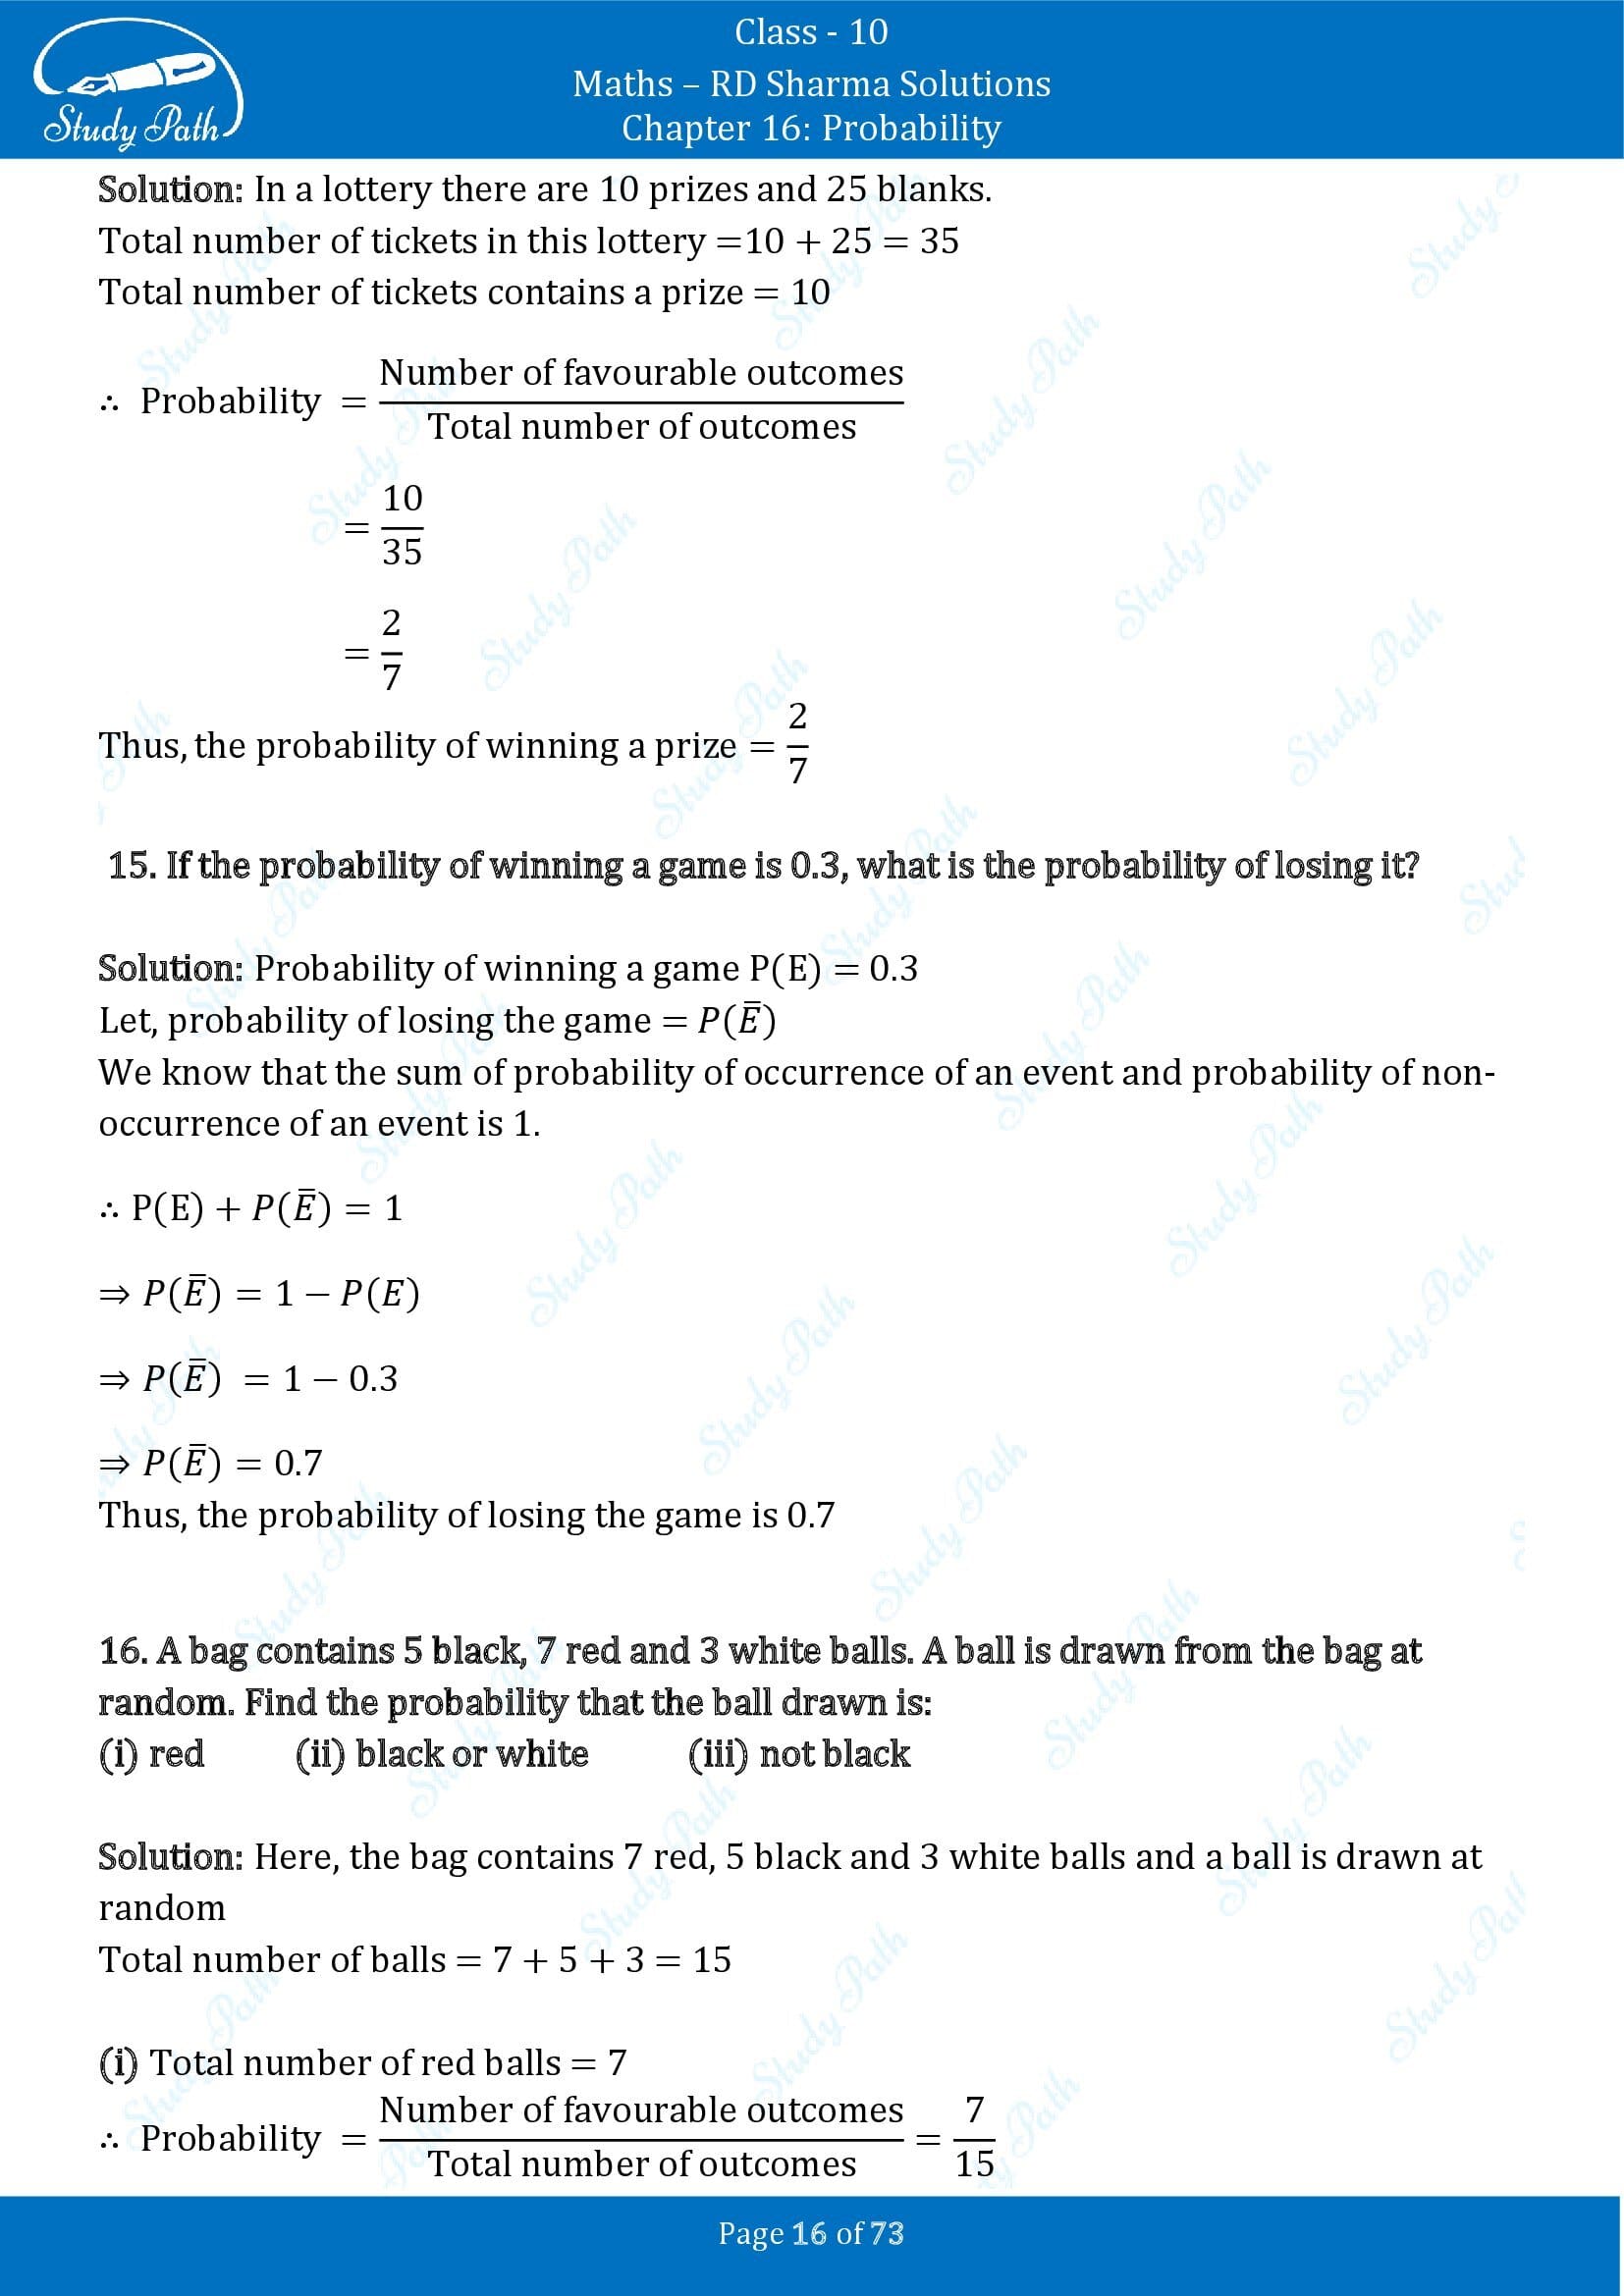 RD Sharma Solutions Class 10 Chapter 16 Probability Exercise 16.1 00016